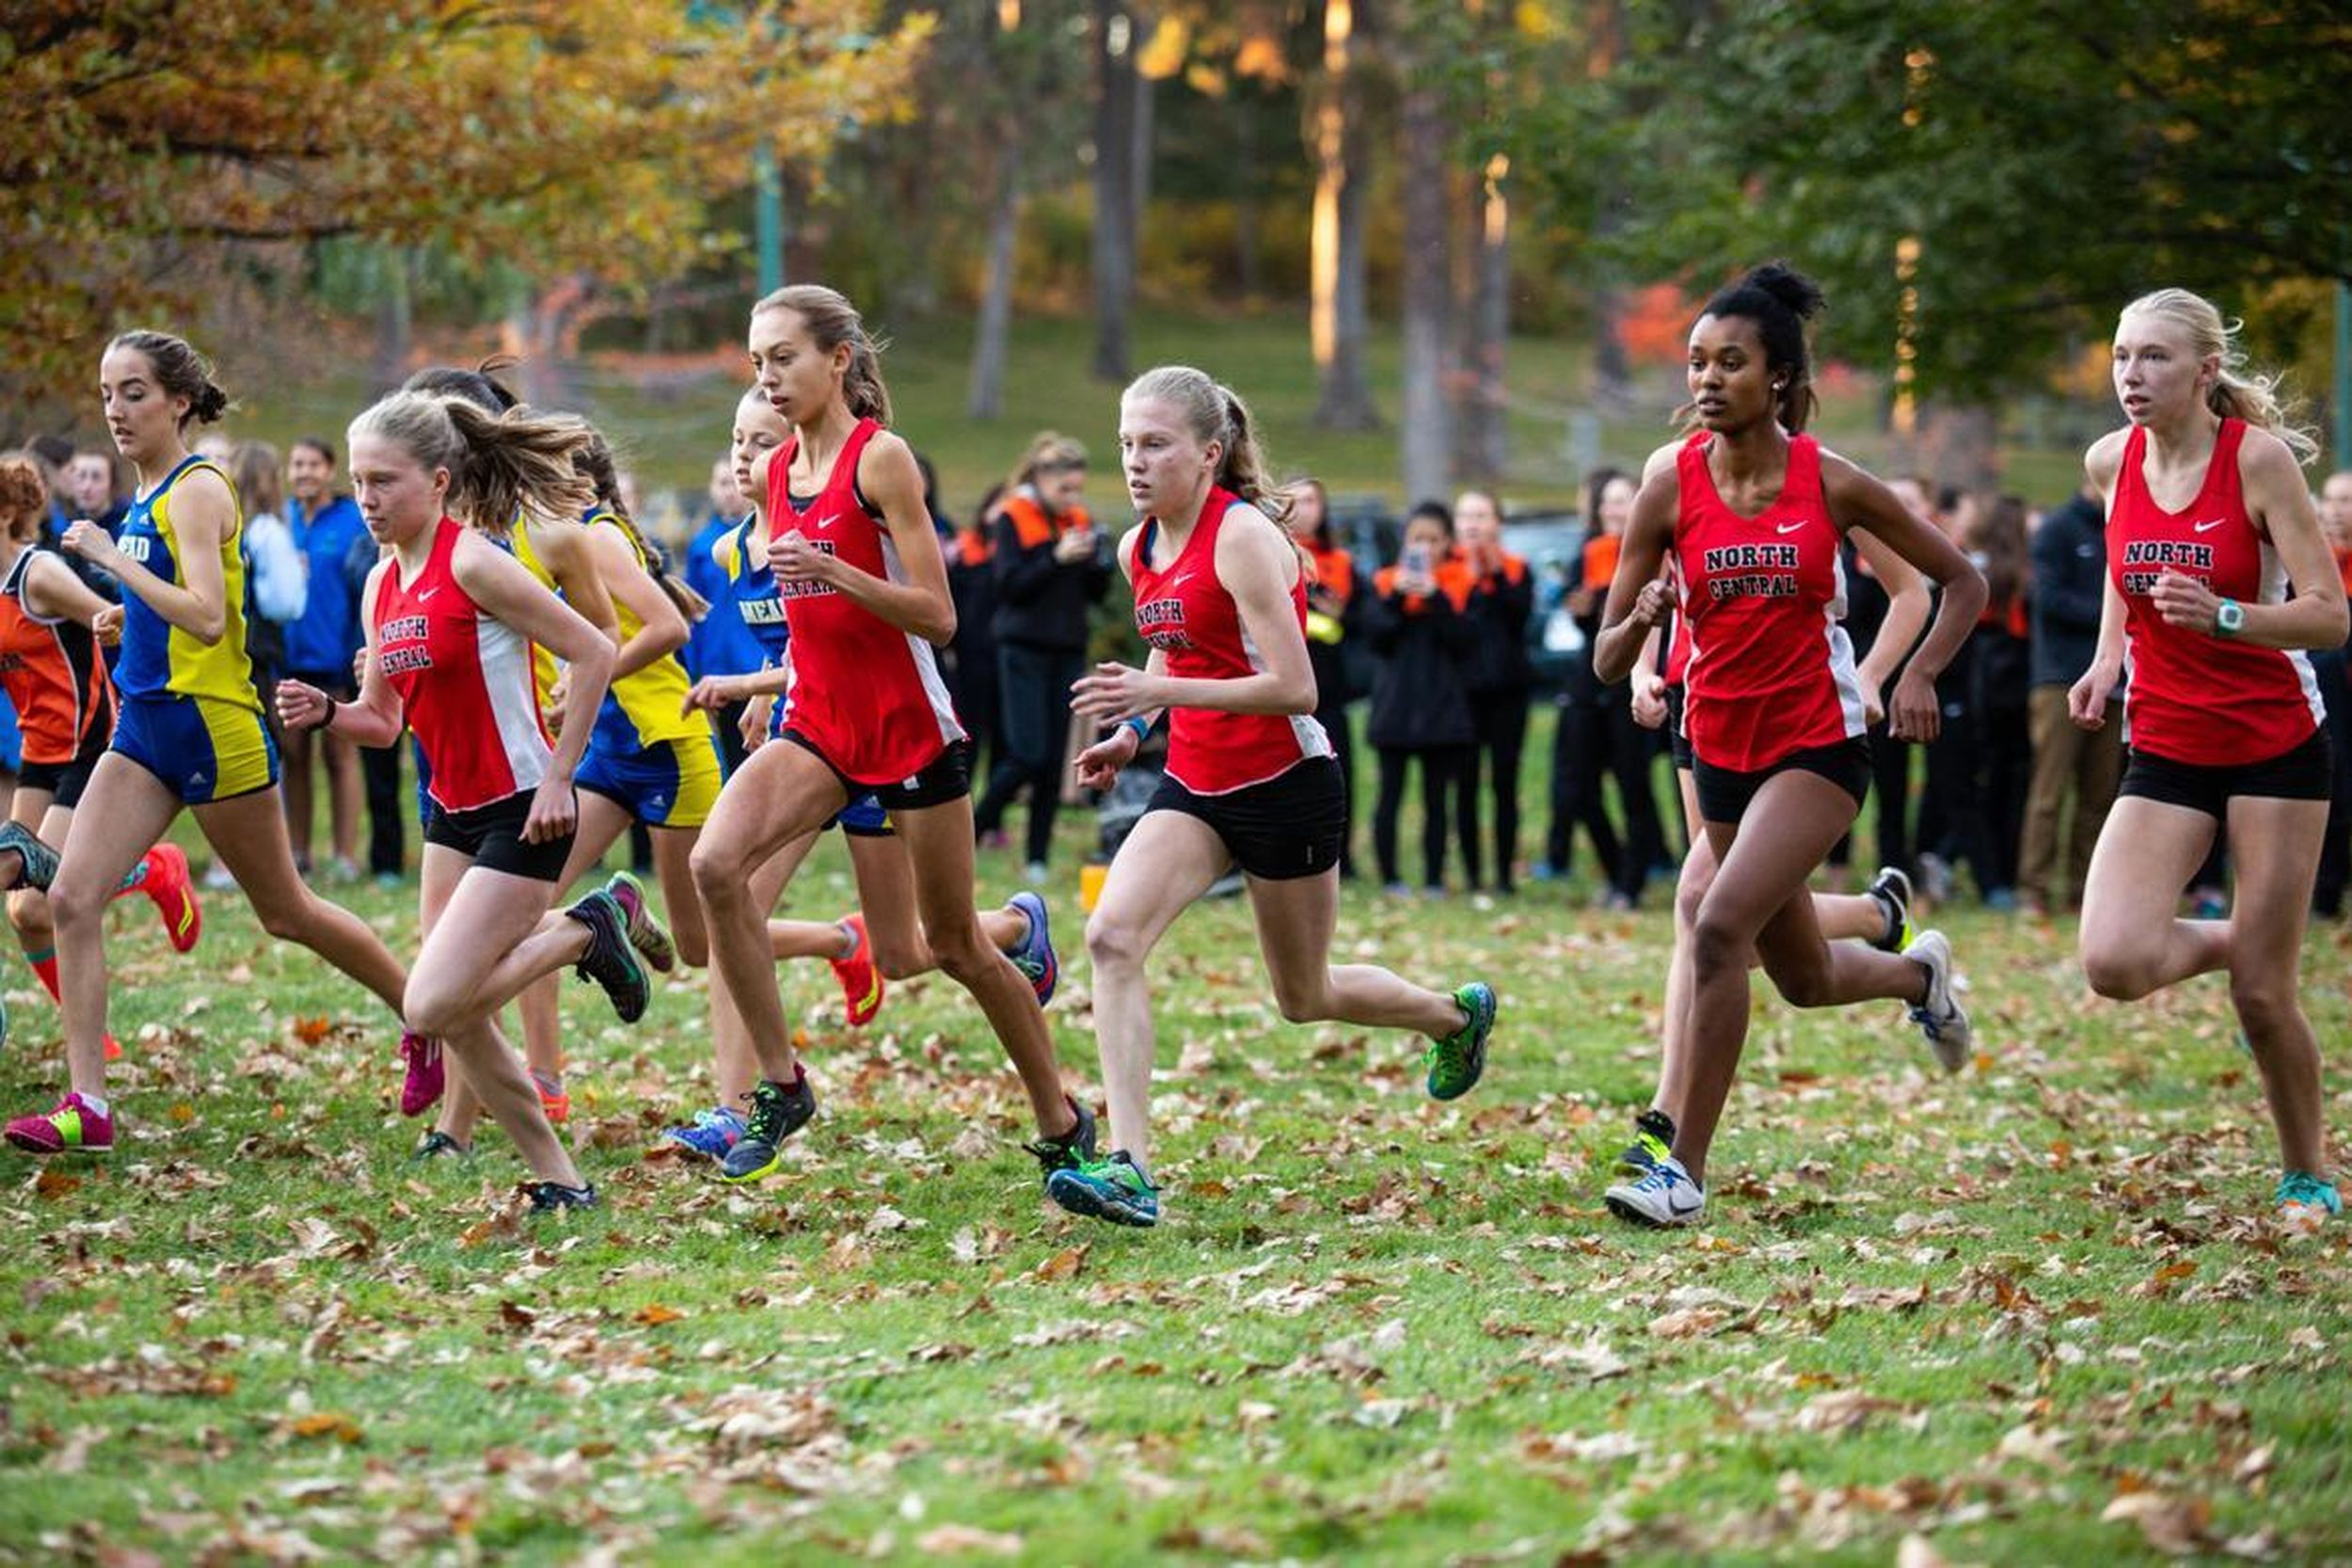 Local prep runners participate in national cross country event The